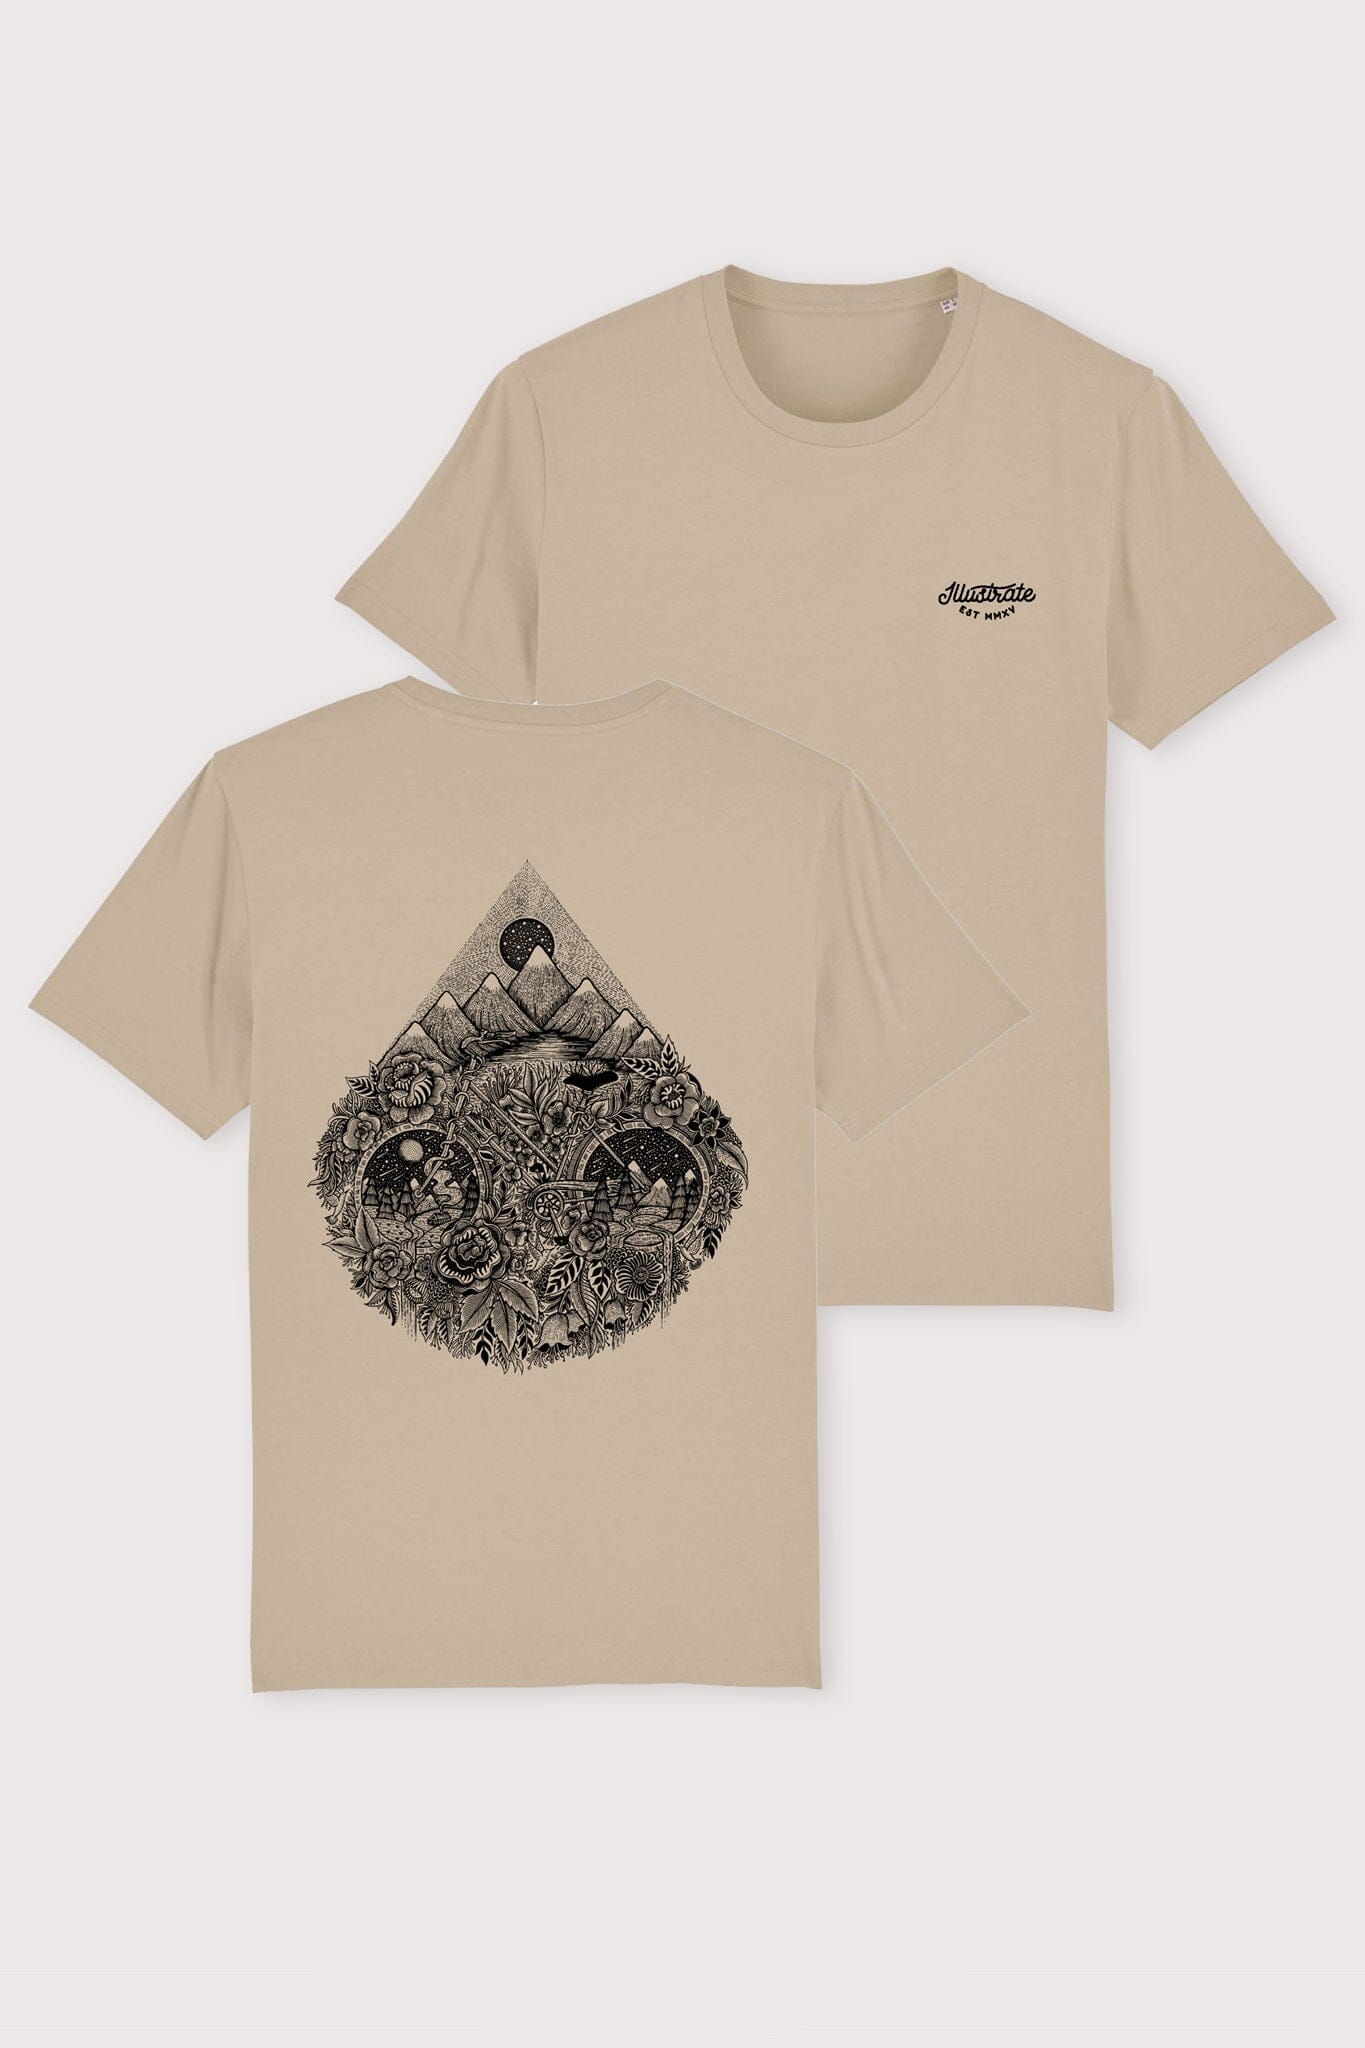 Men's T-shirt | Ride to Nature